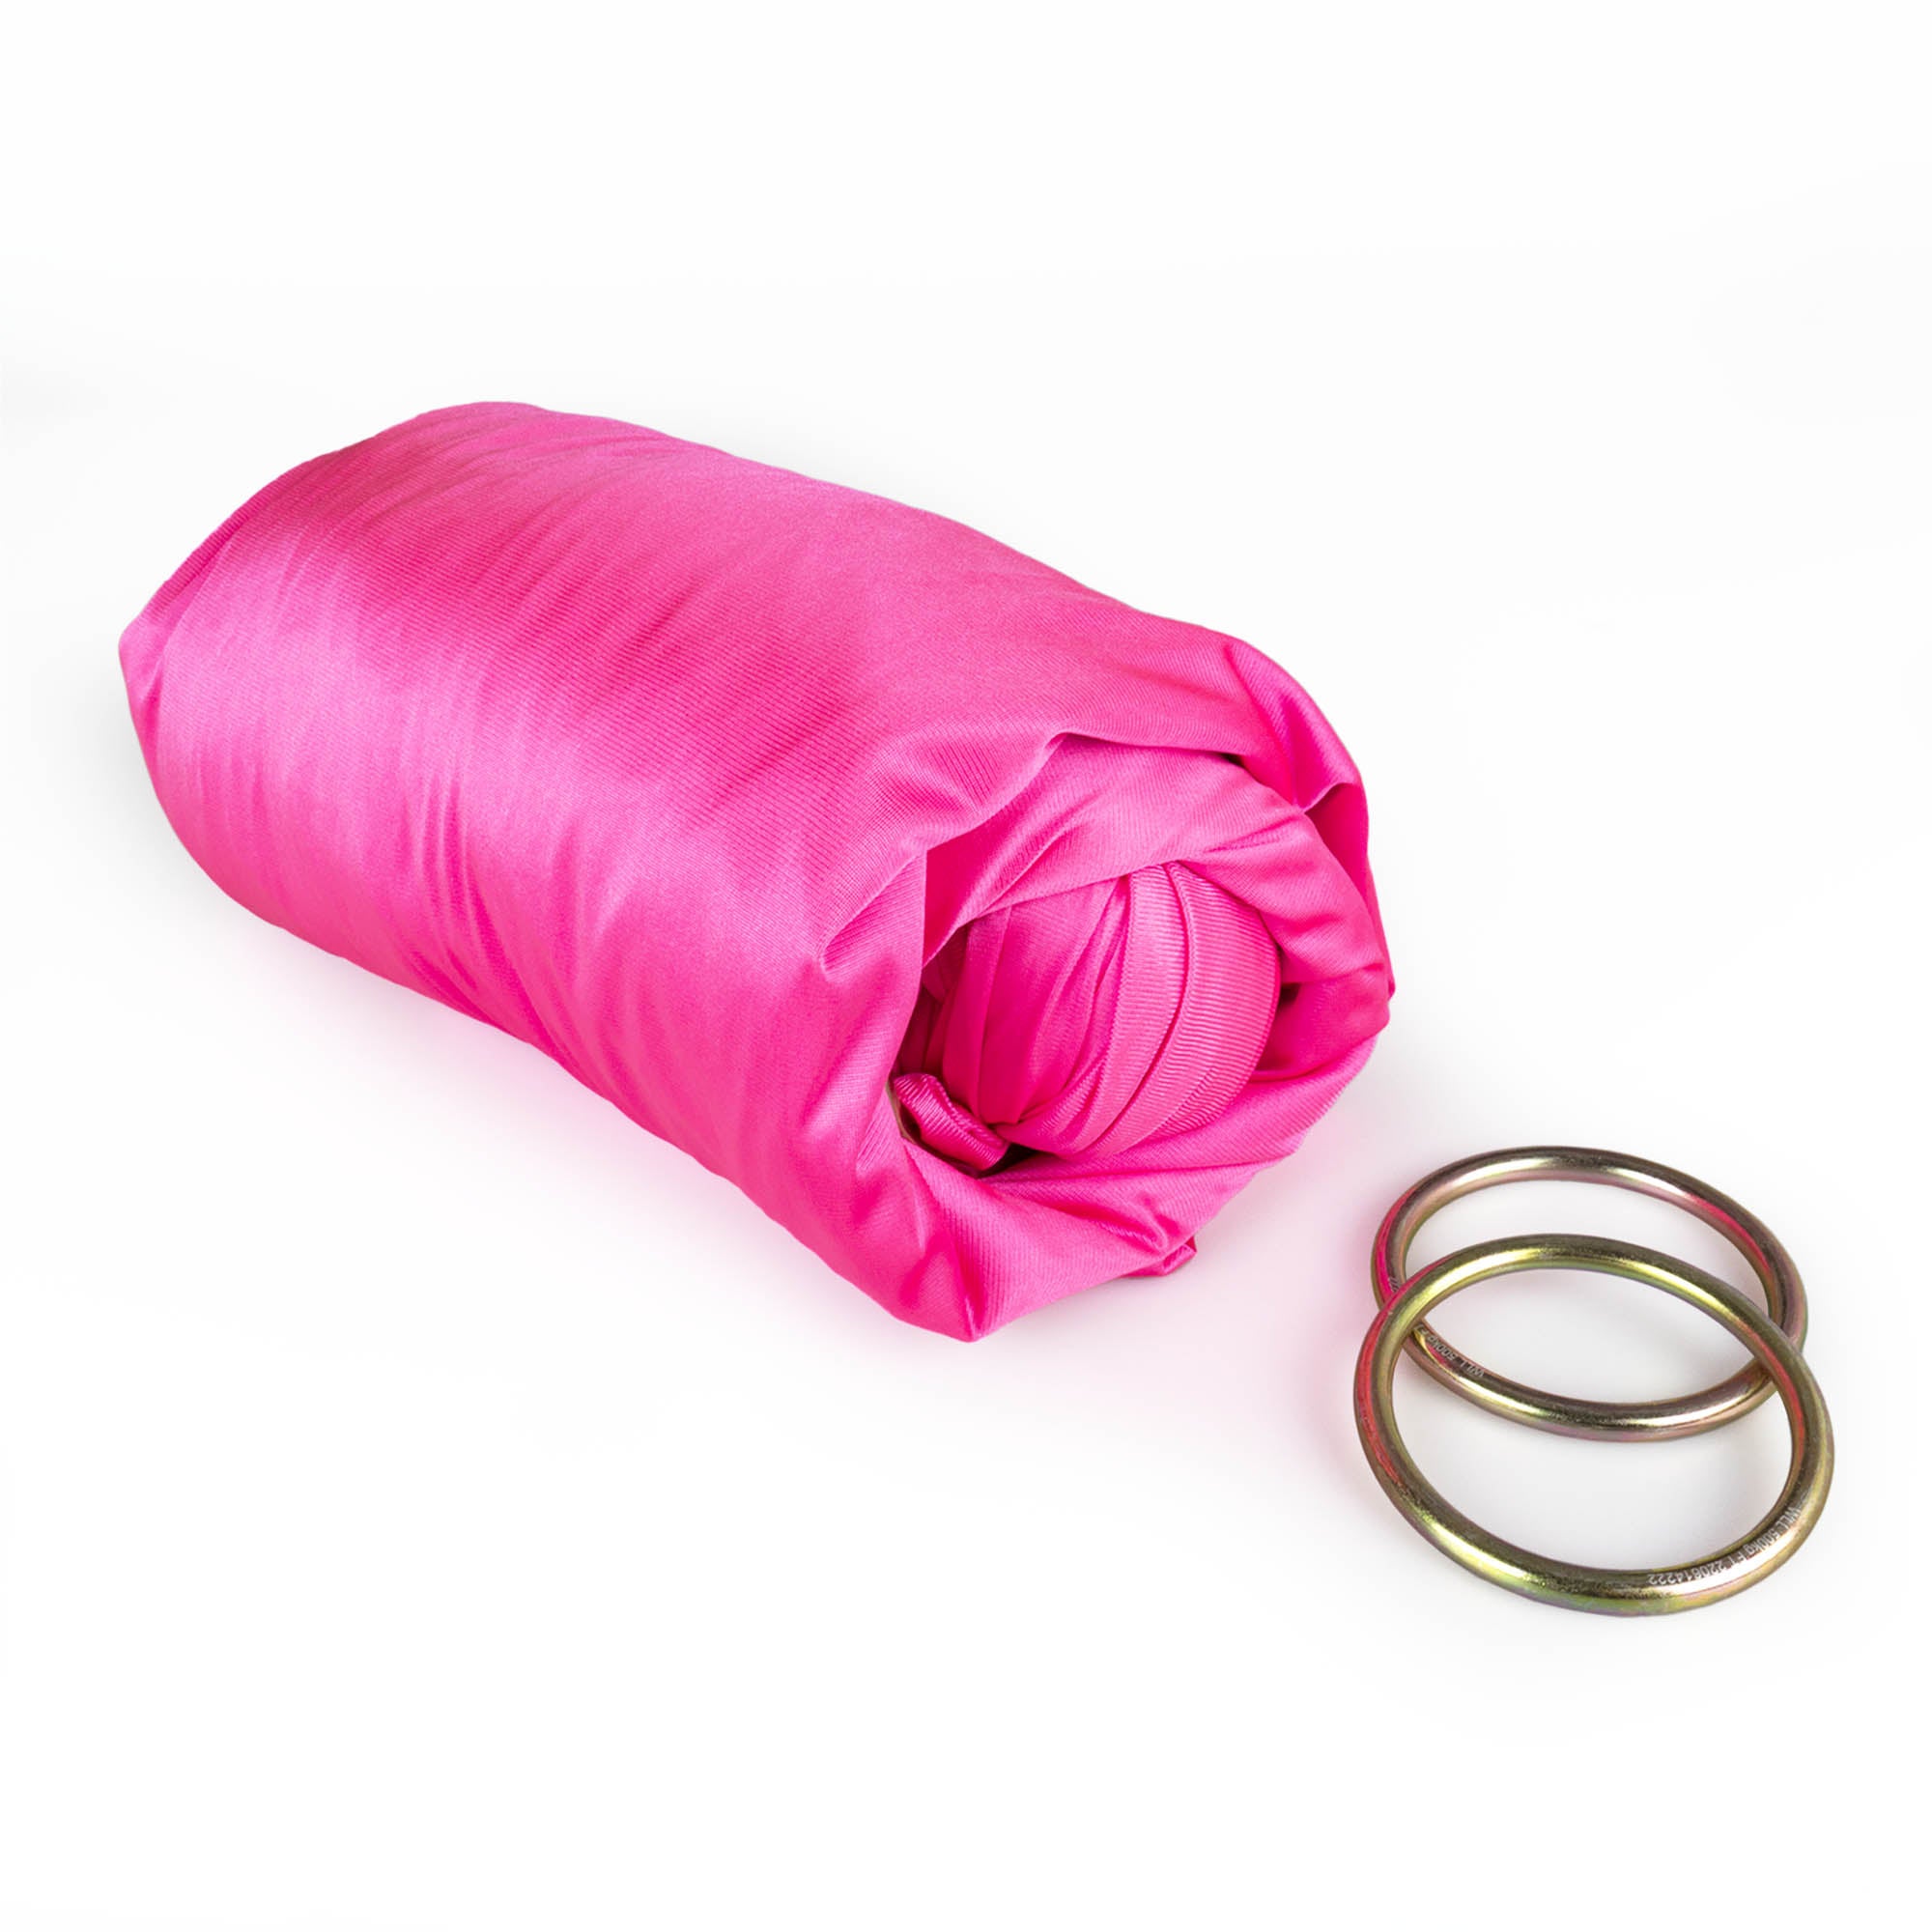 Pink yoga hammock with O rings detached